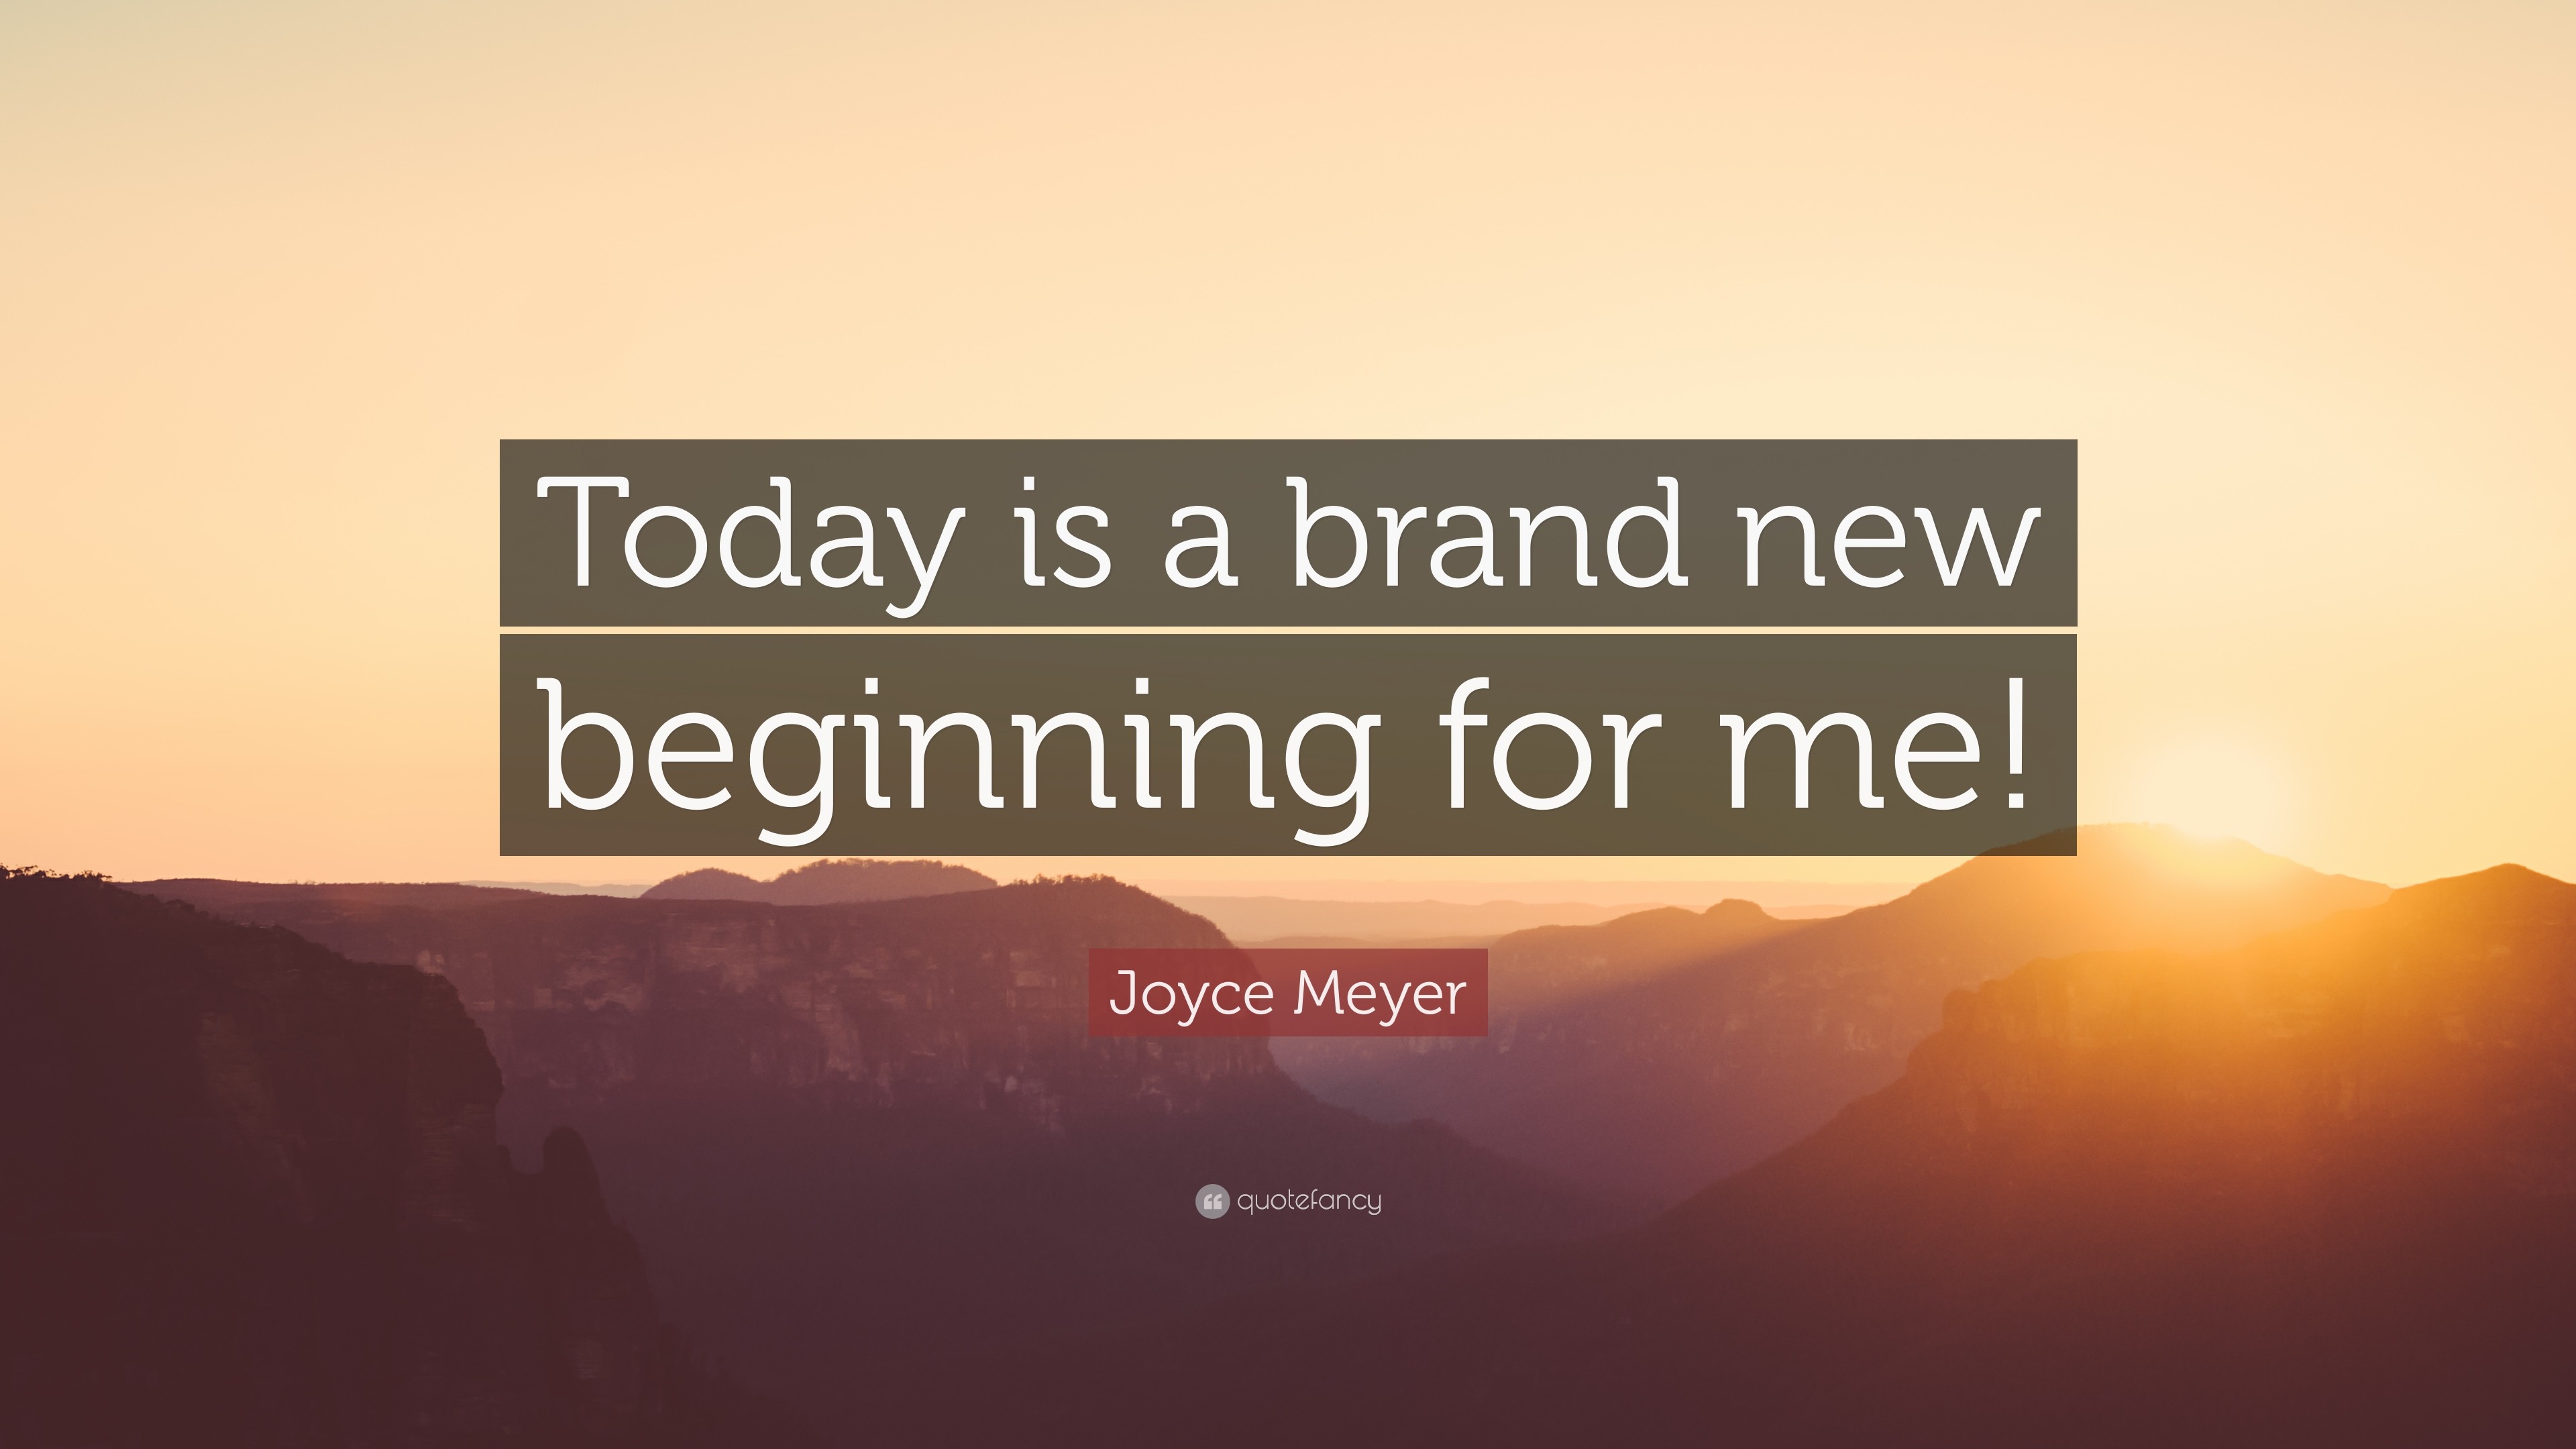 3840x2160 Joyce Meyer Quote: “Today is a brand new beginning for me!”